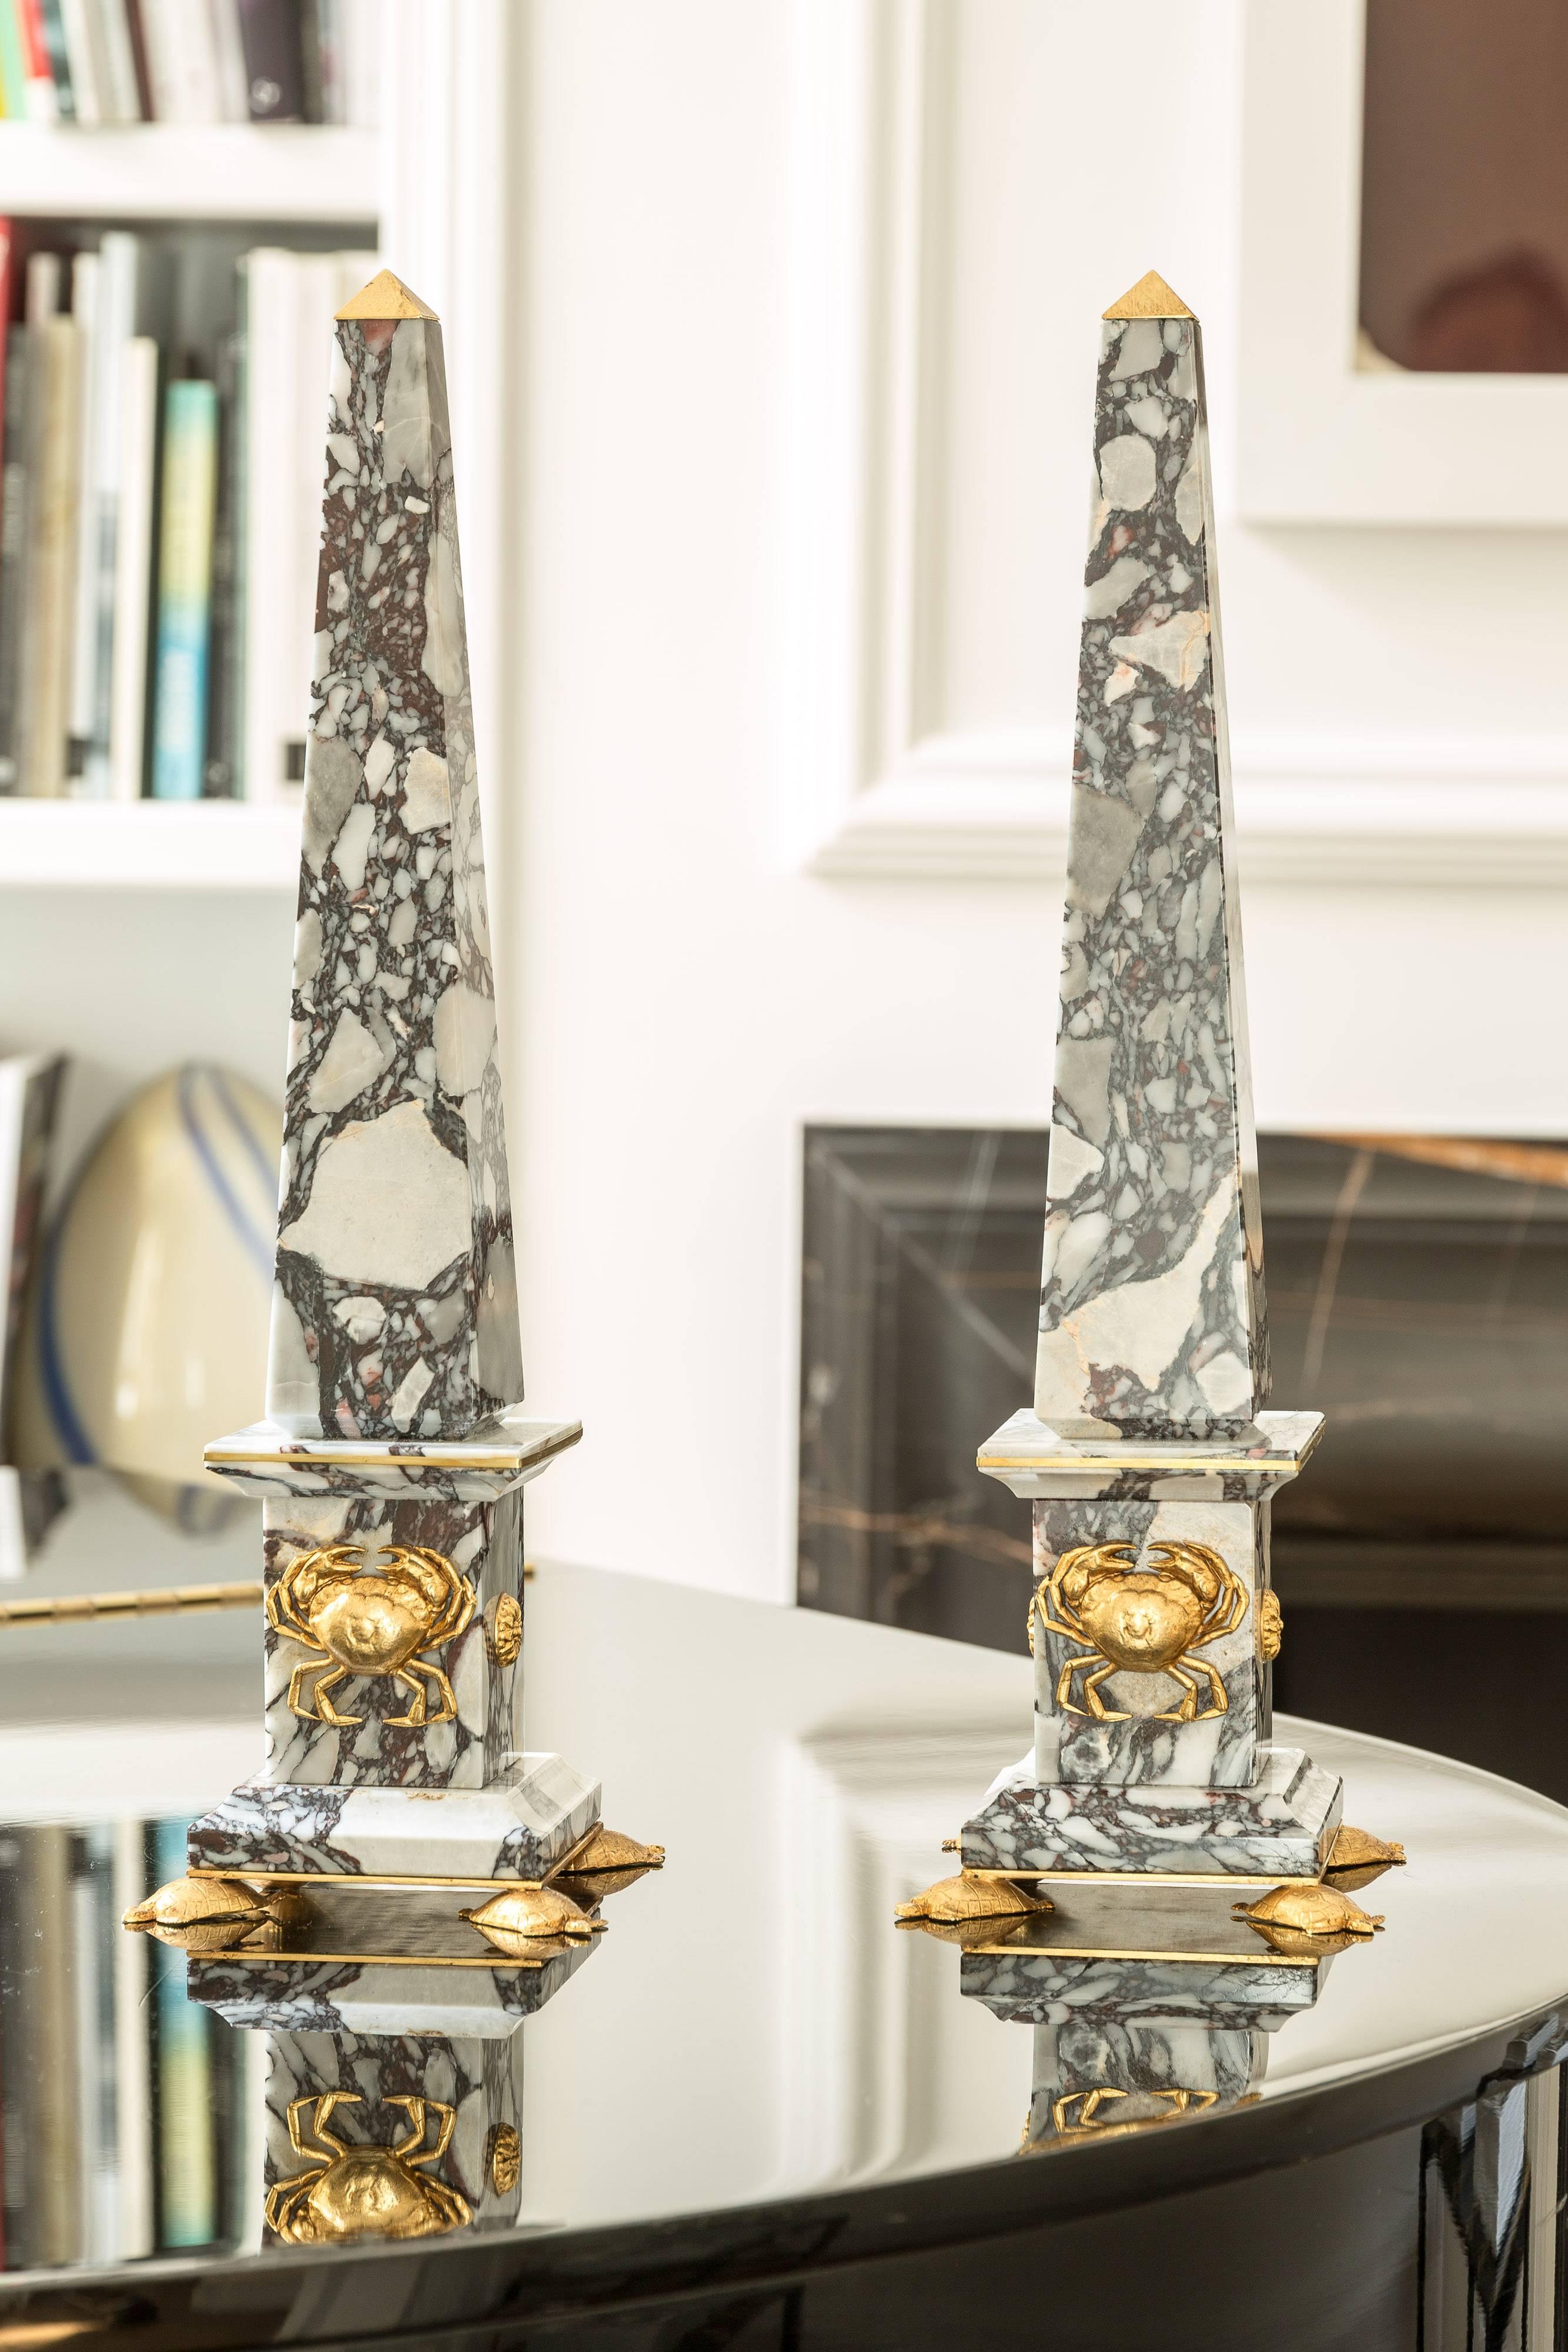 Pair of Italian marble and bronze obelisks CRABS -Grand Tour collection- produced by Lorenzo Ciompi, 2017. Limited edition, 2017.
designed, produced and executed directly in exclusivity for the seller on limited edition of 10
breccia mediacea